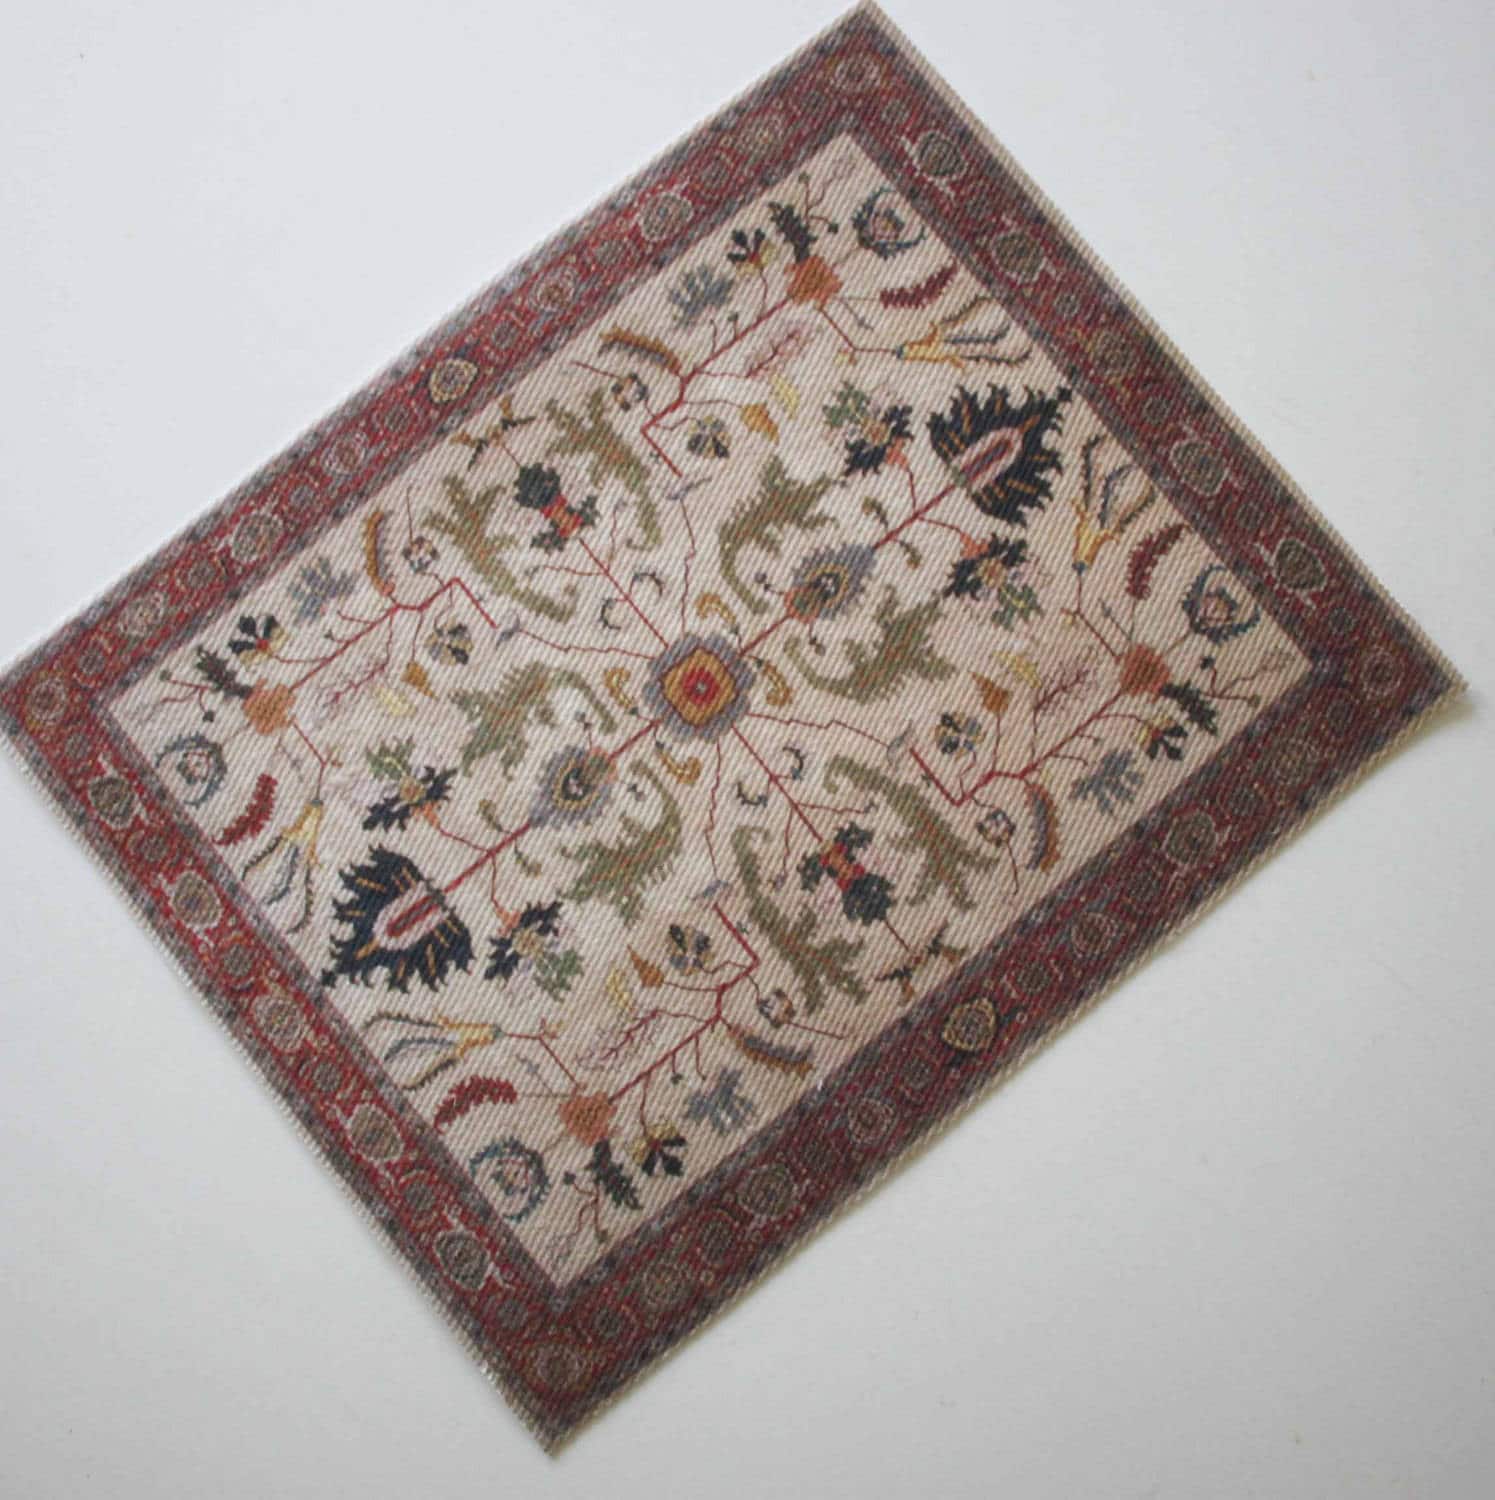 approximately 5" x 7-1/2" 1:12 Scale Dollhouse Area Rug 0002058 